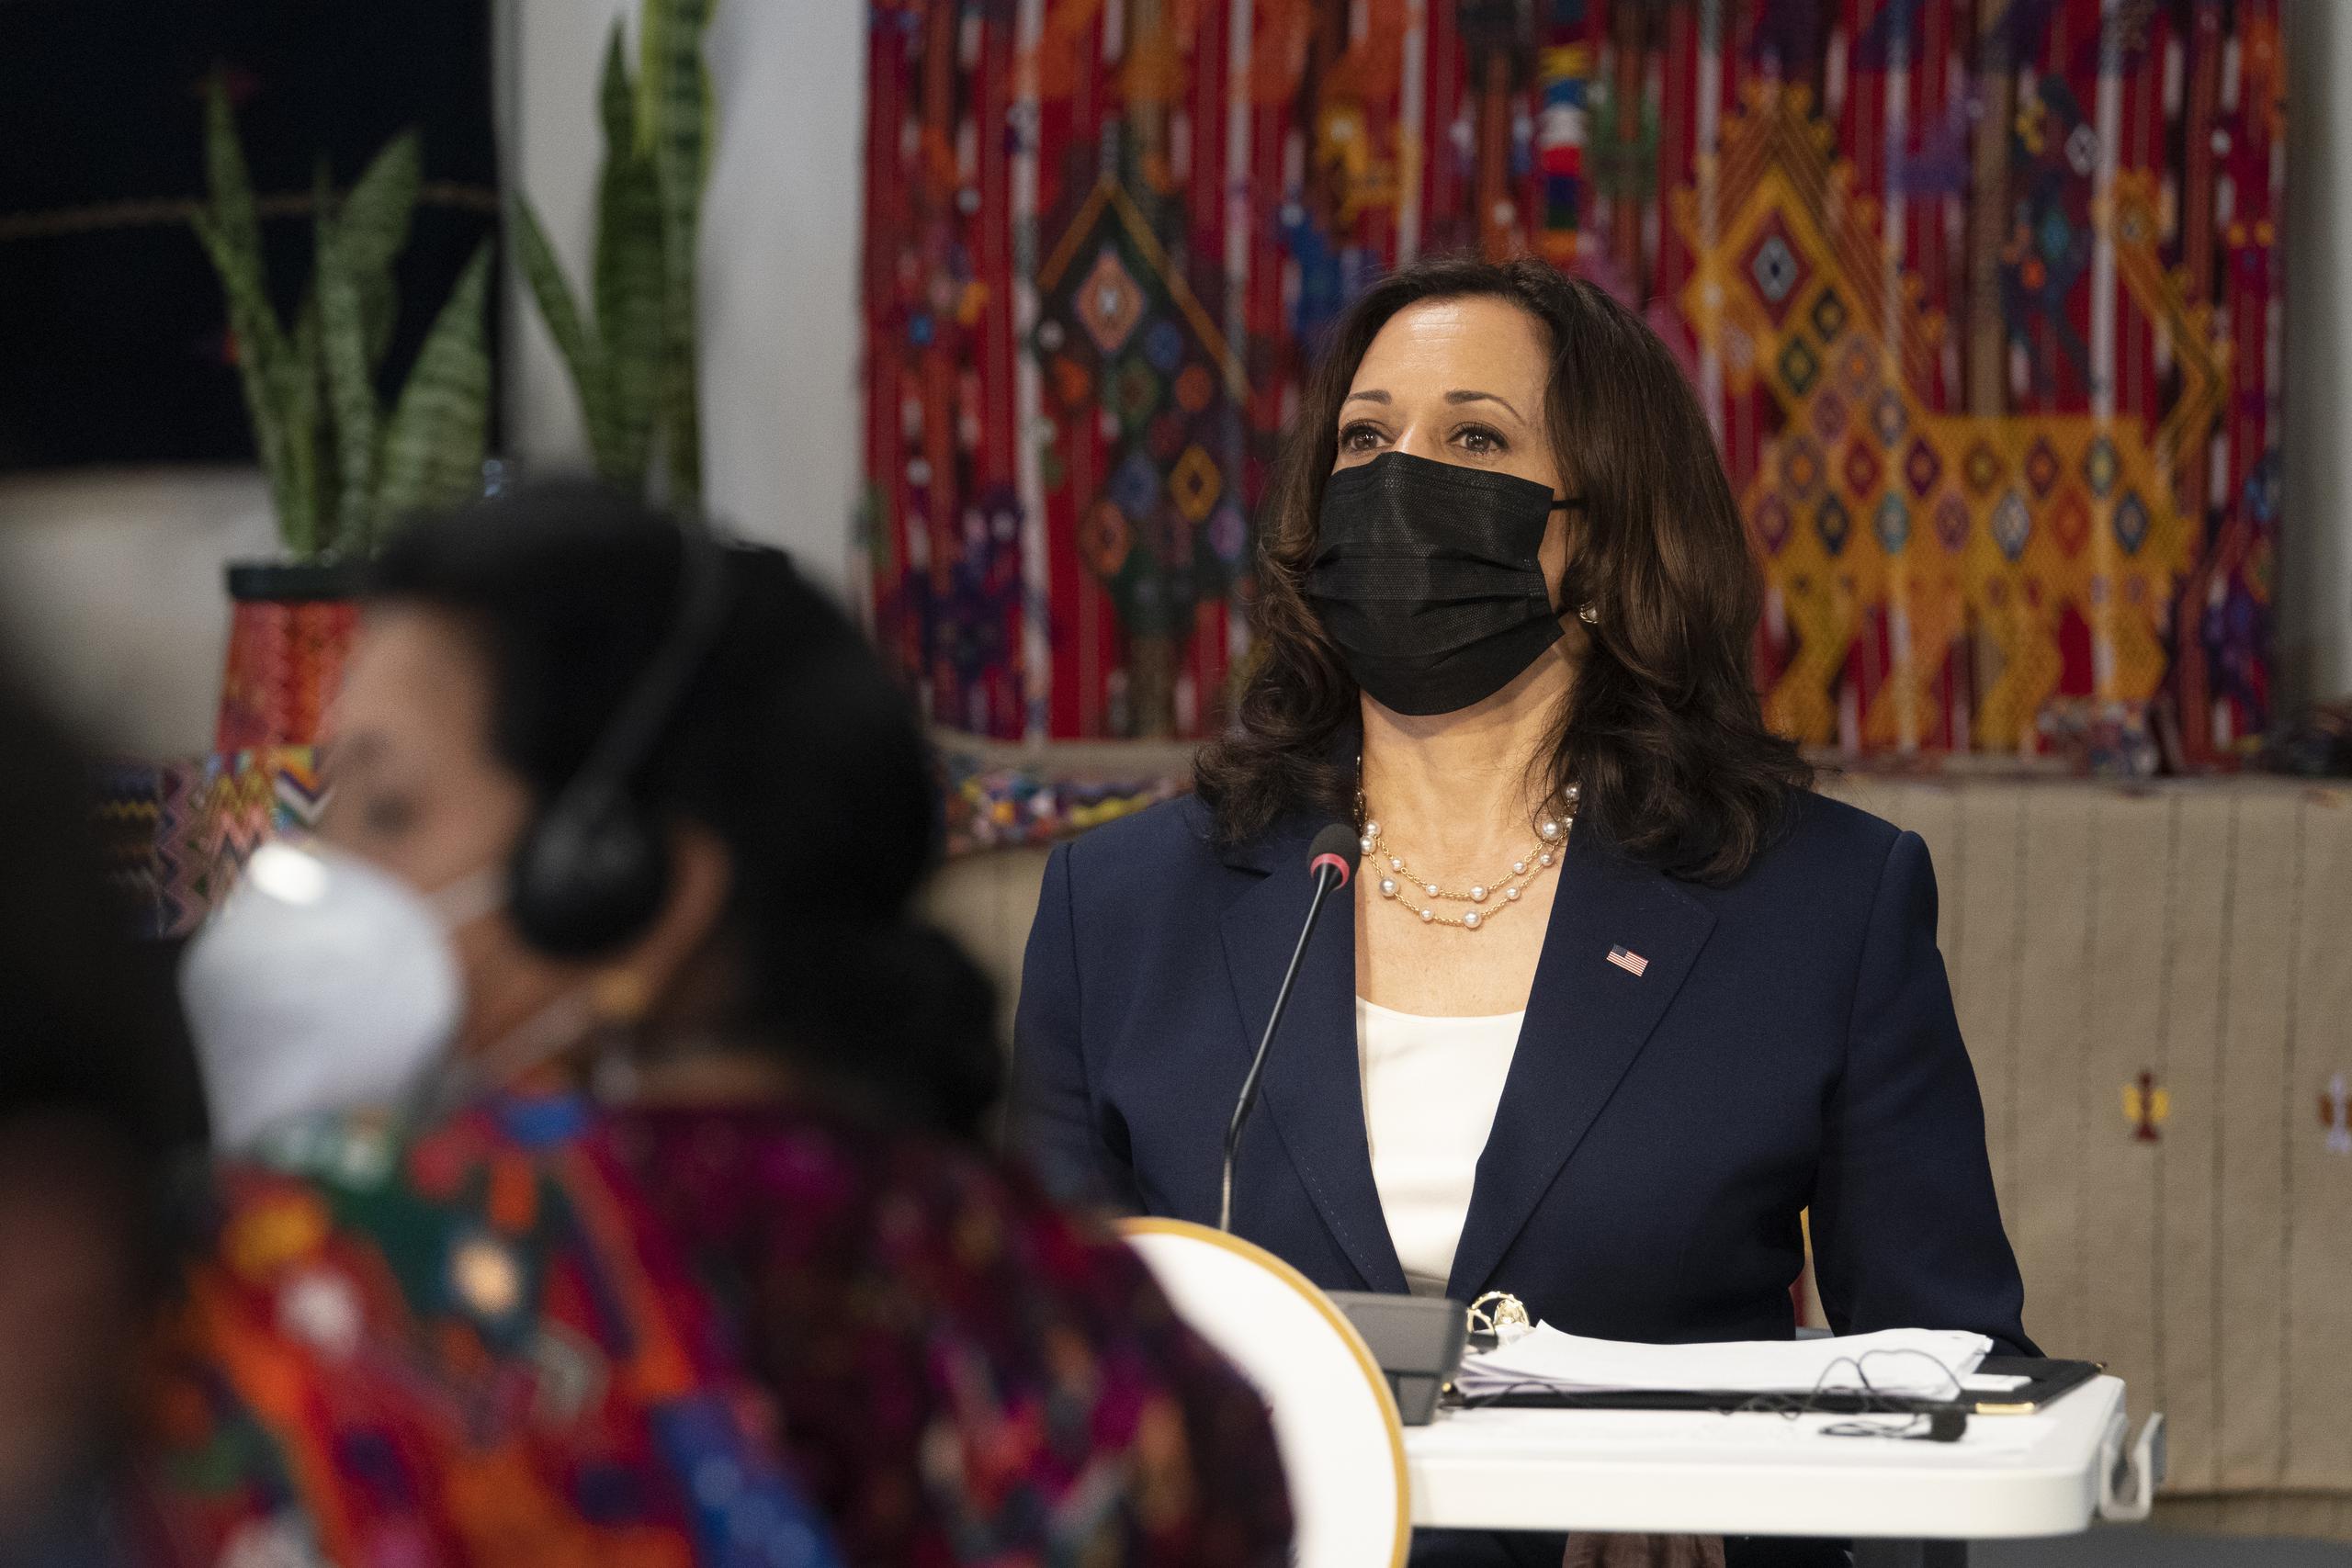 Vice President Kamala Harris attends a meeting with community leaders, at the Universidad del Valle de Guatemala, Monday, June 7, 2021, in Guatemala City. (AP Photo/Jacquelyn Martin)